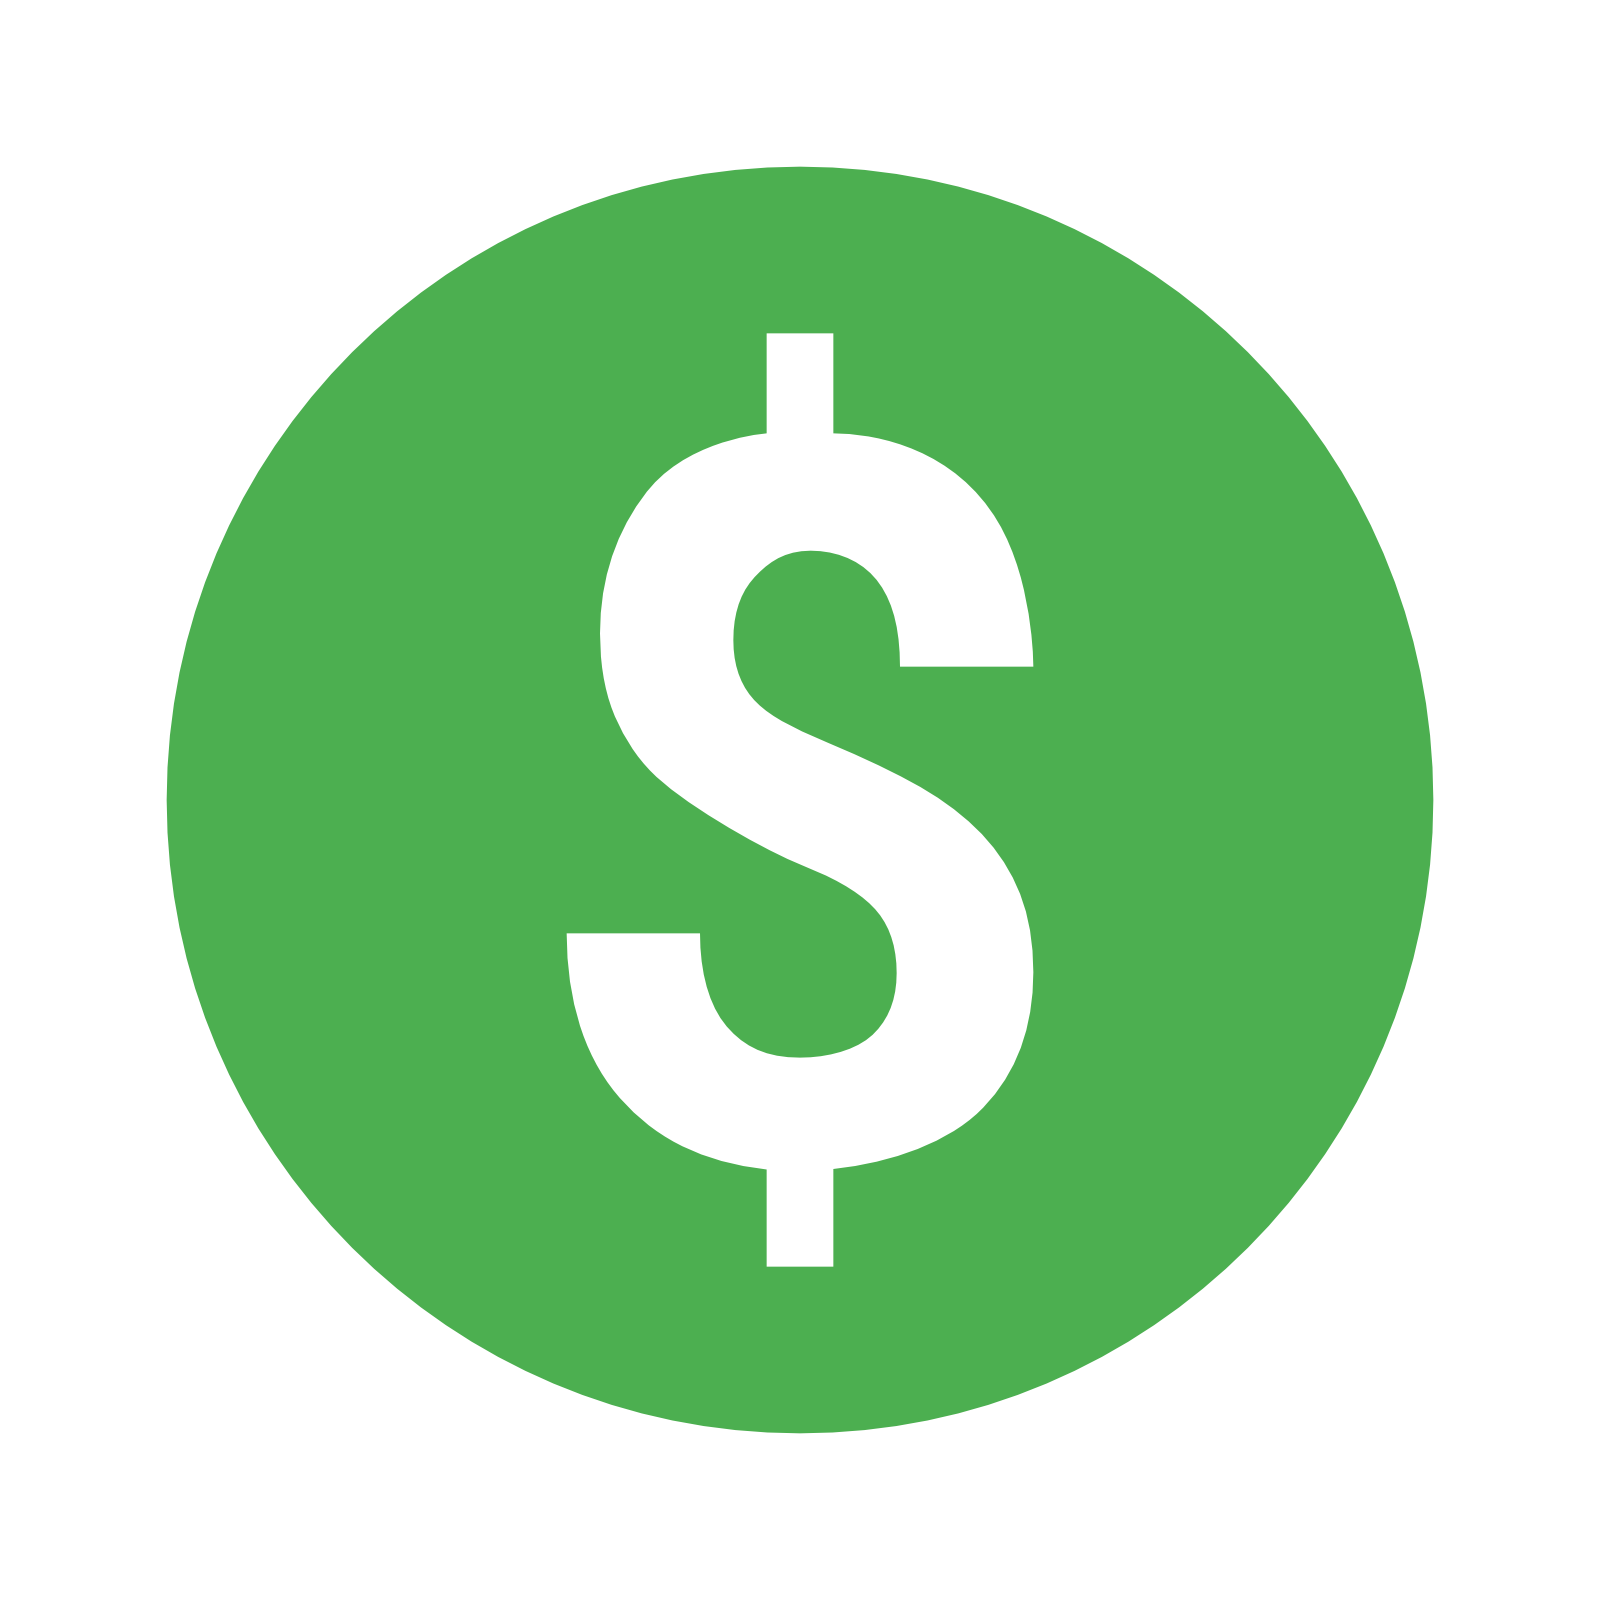 United States Dollar Icon design Icon - Dollar sign PNG png download ...